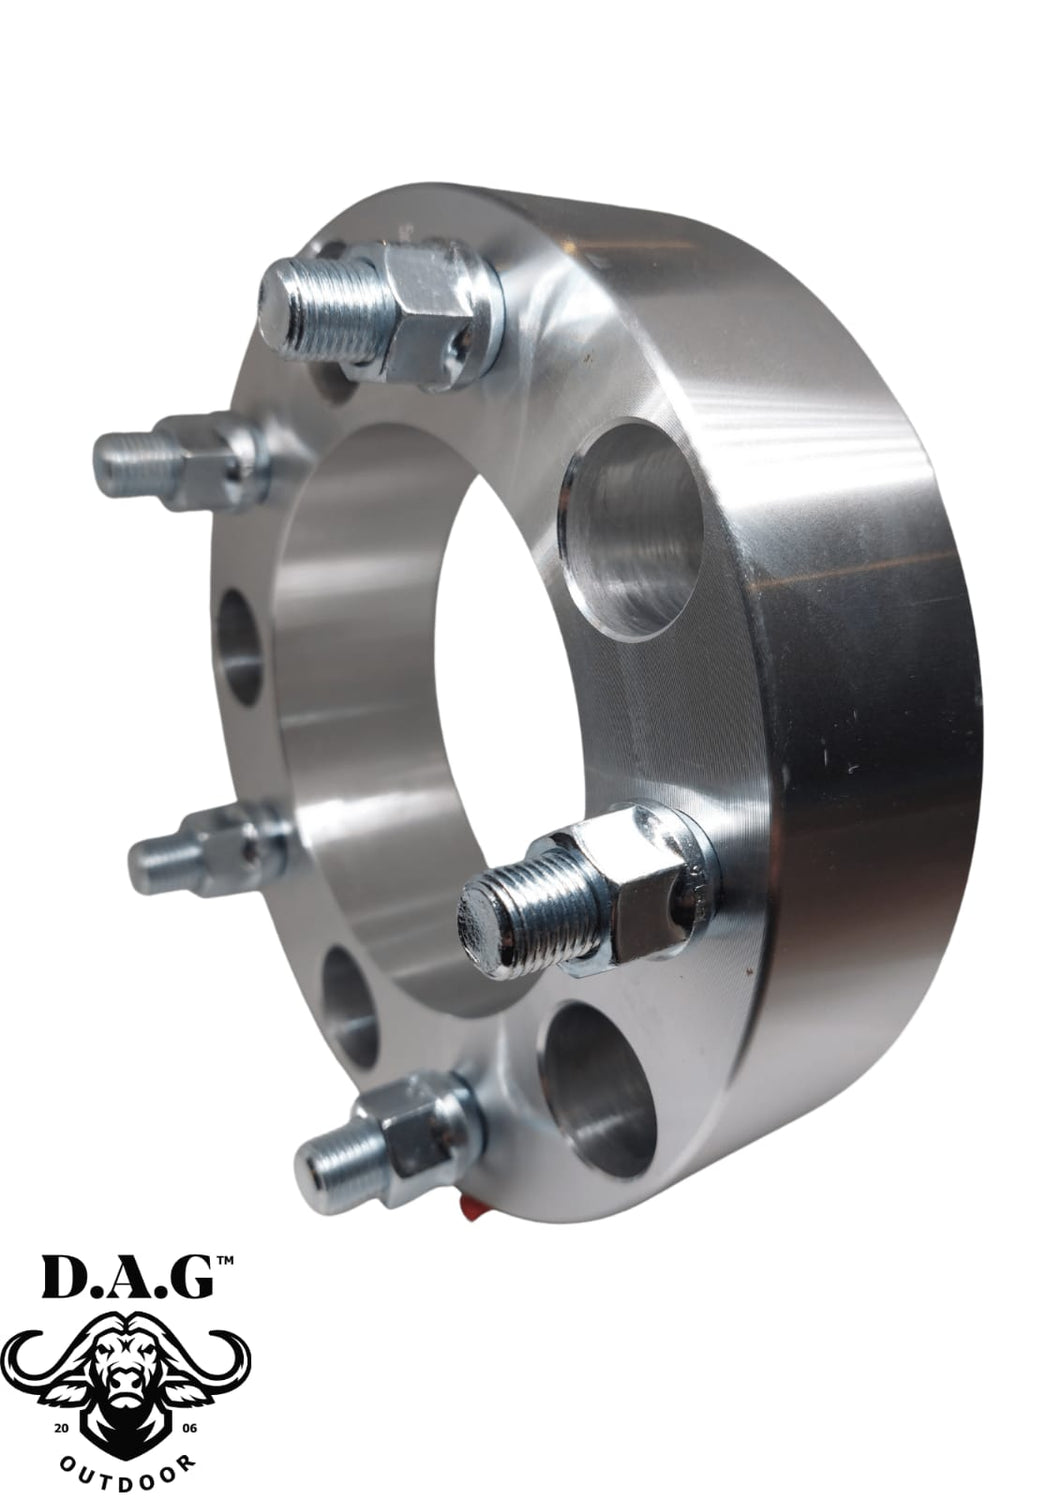 D.A.G LC79 REAR 45 MM WHEEL SPACERS